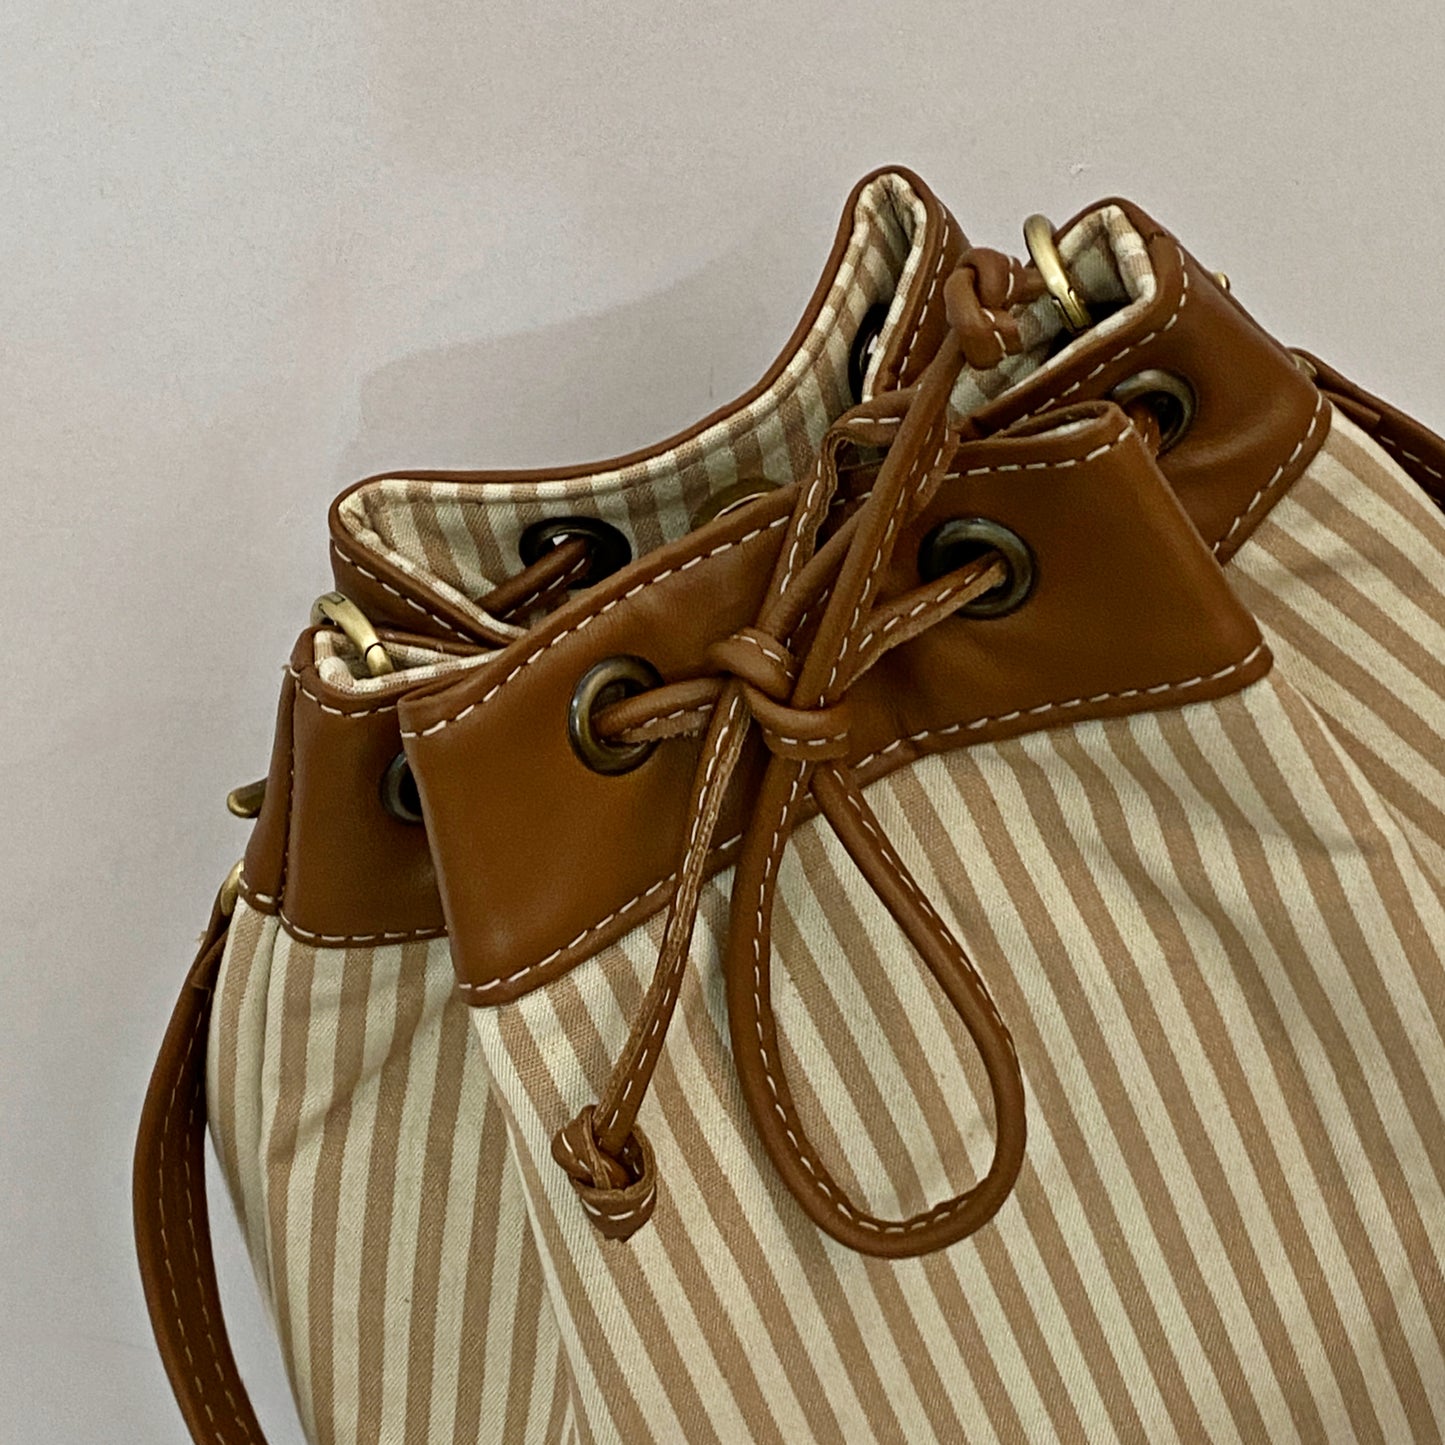 BUCKETBAG/BACKPACK (stripes fabric & leather details)